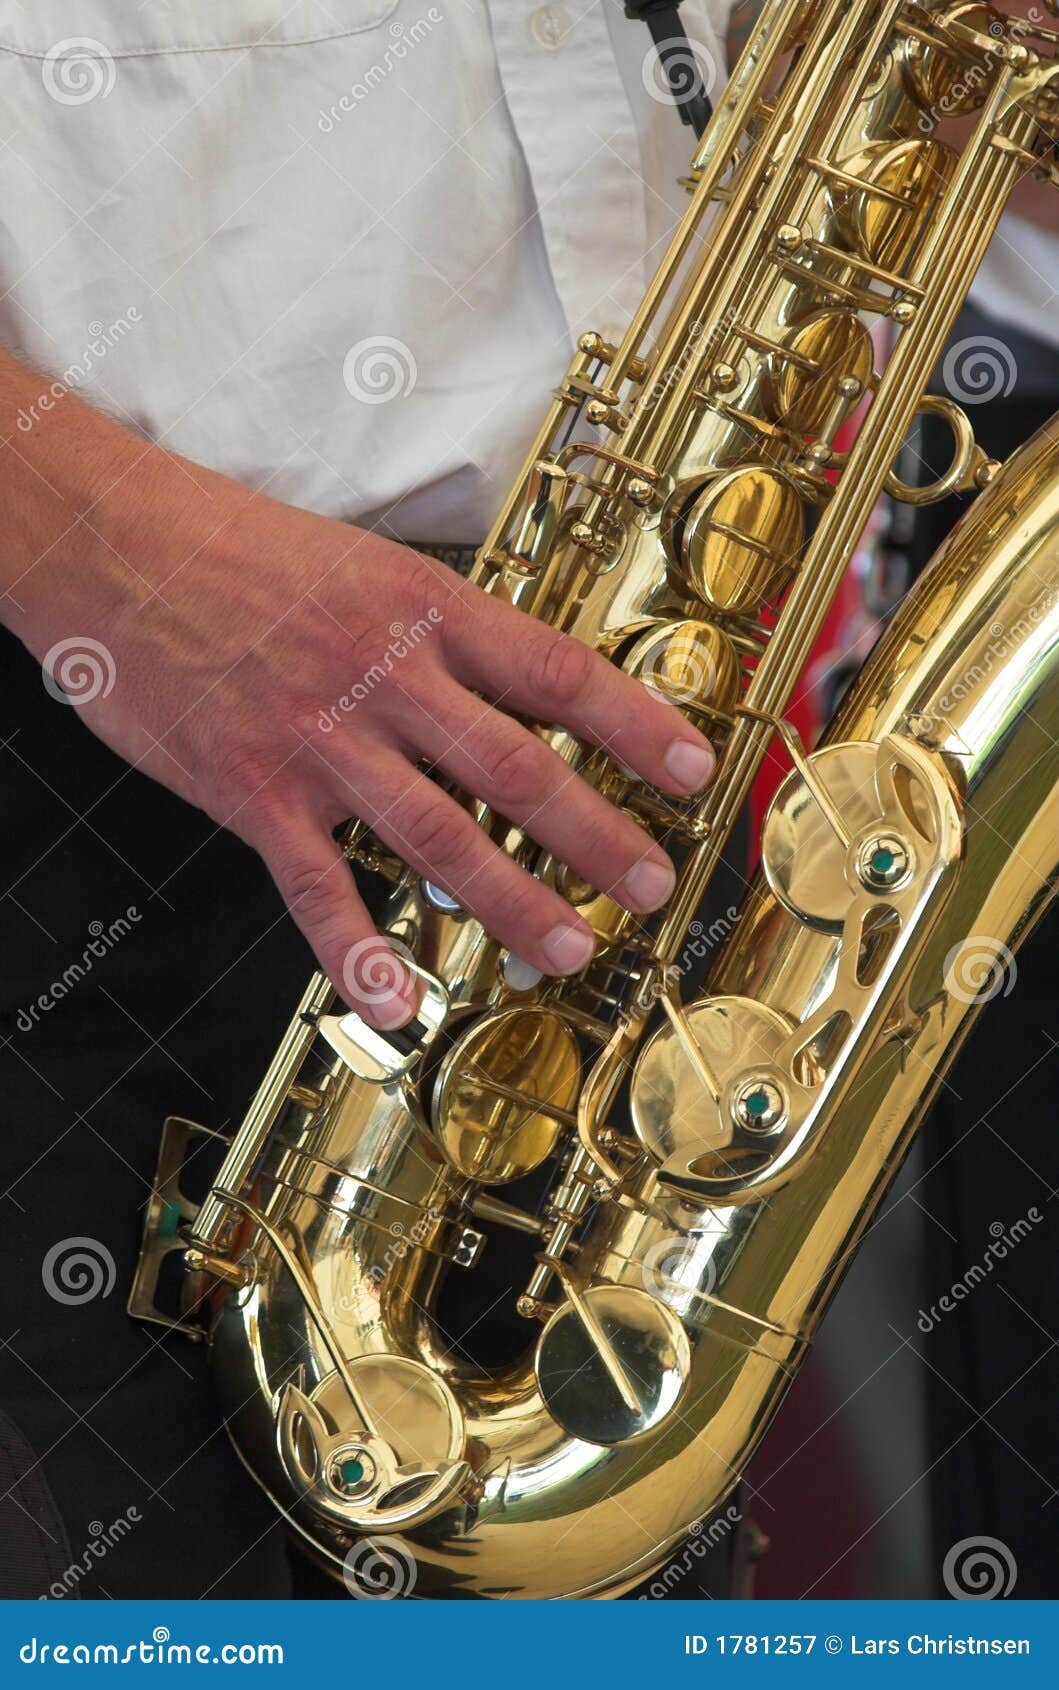 Man and sax stock image. Image of antique, gold, metal - 1781257